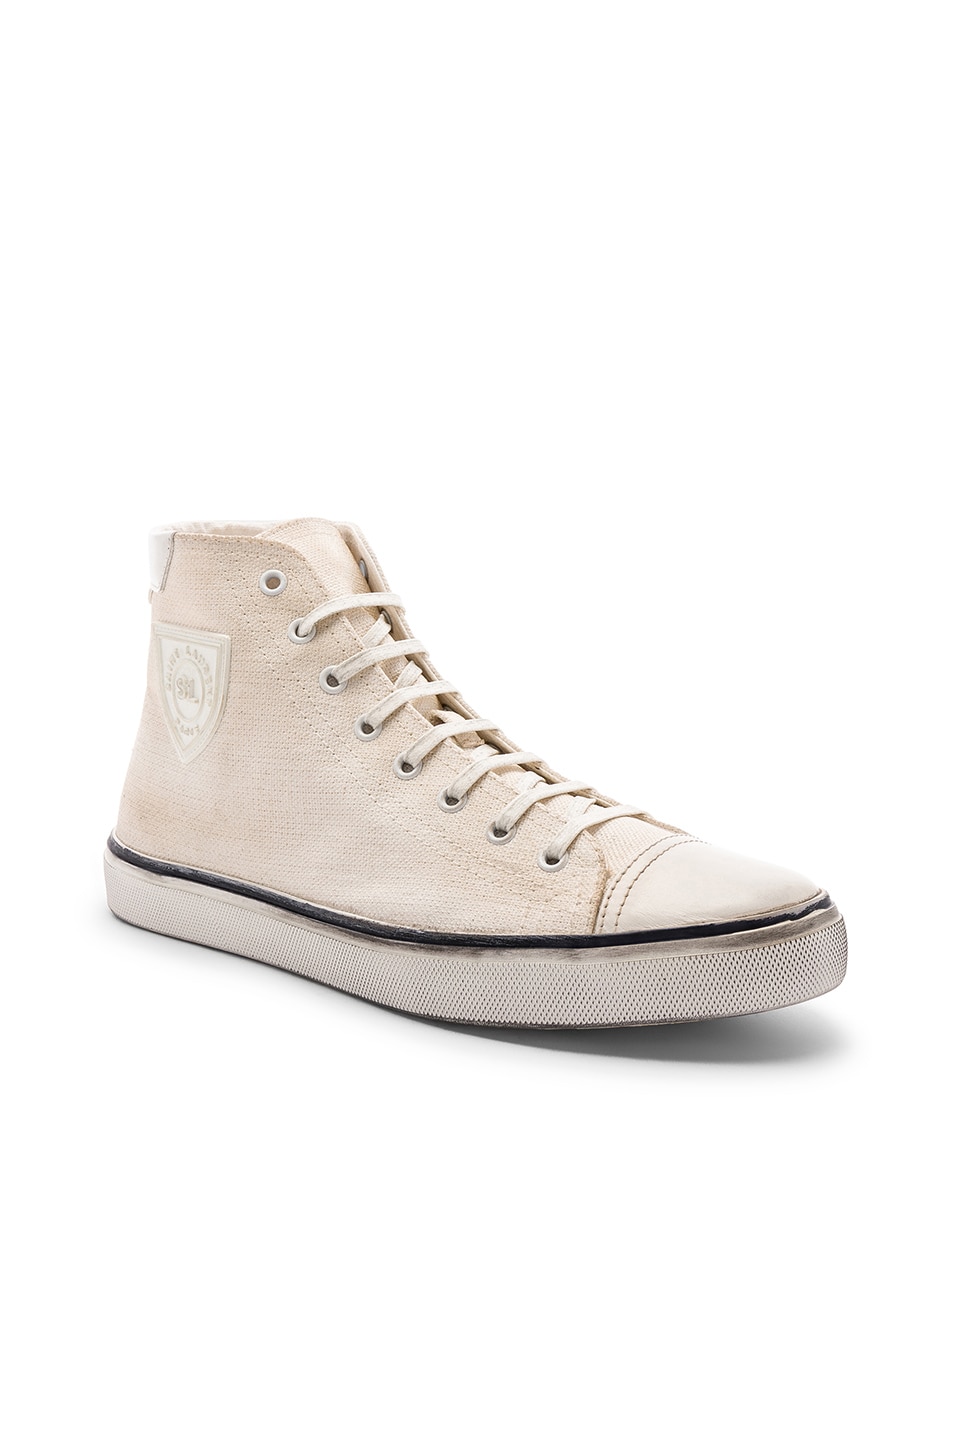 Image 1 of Saint Laurent Bedford Patch Sneaker in Optic White & Sand